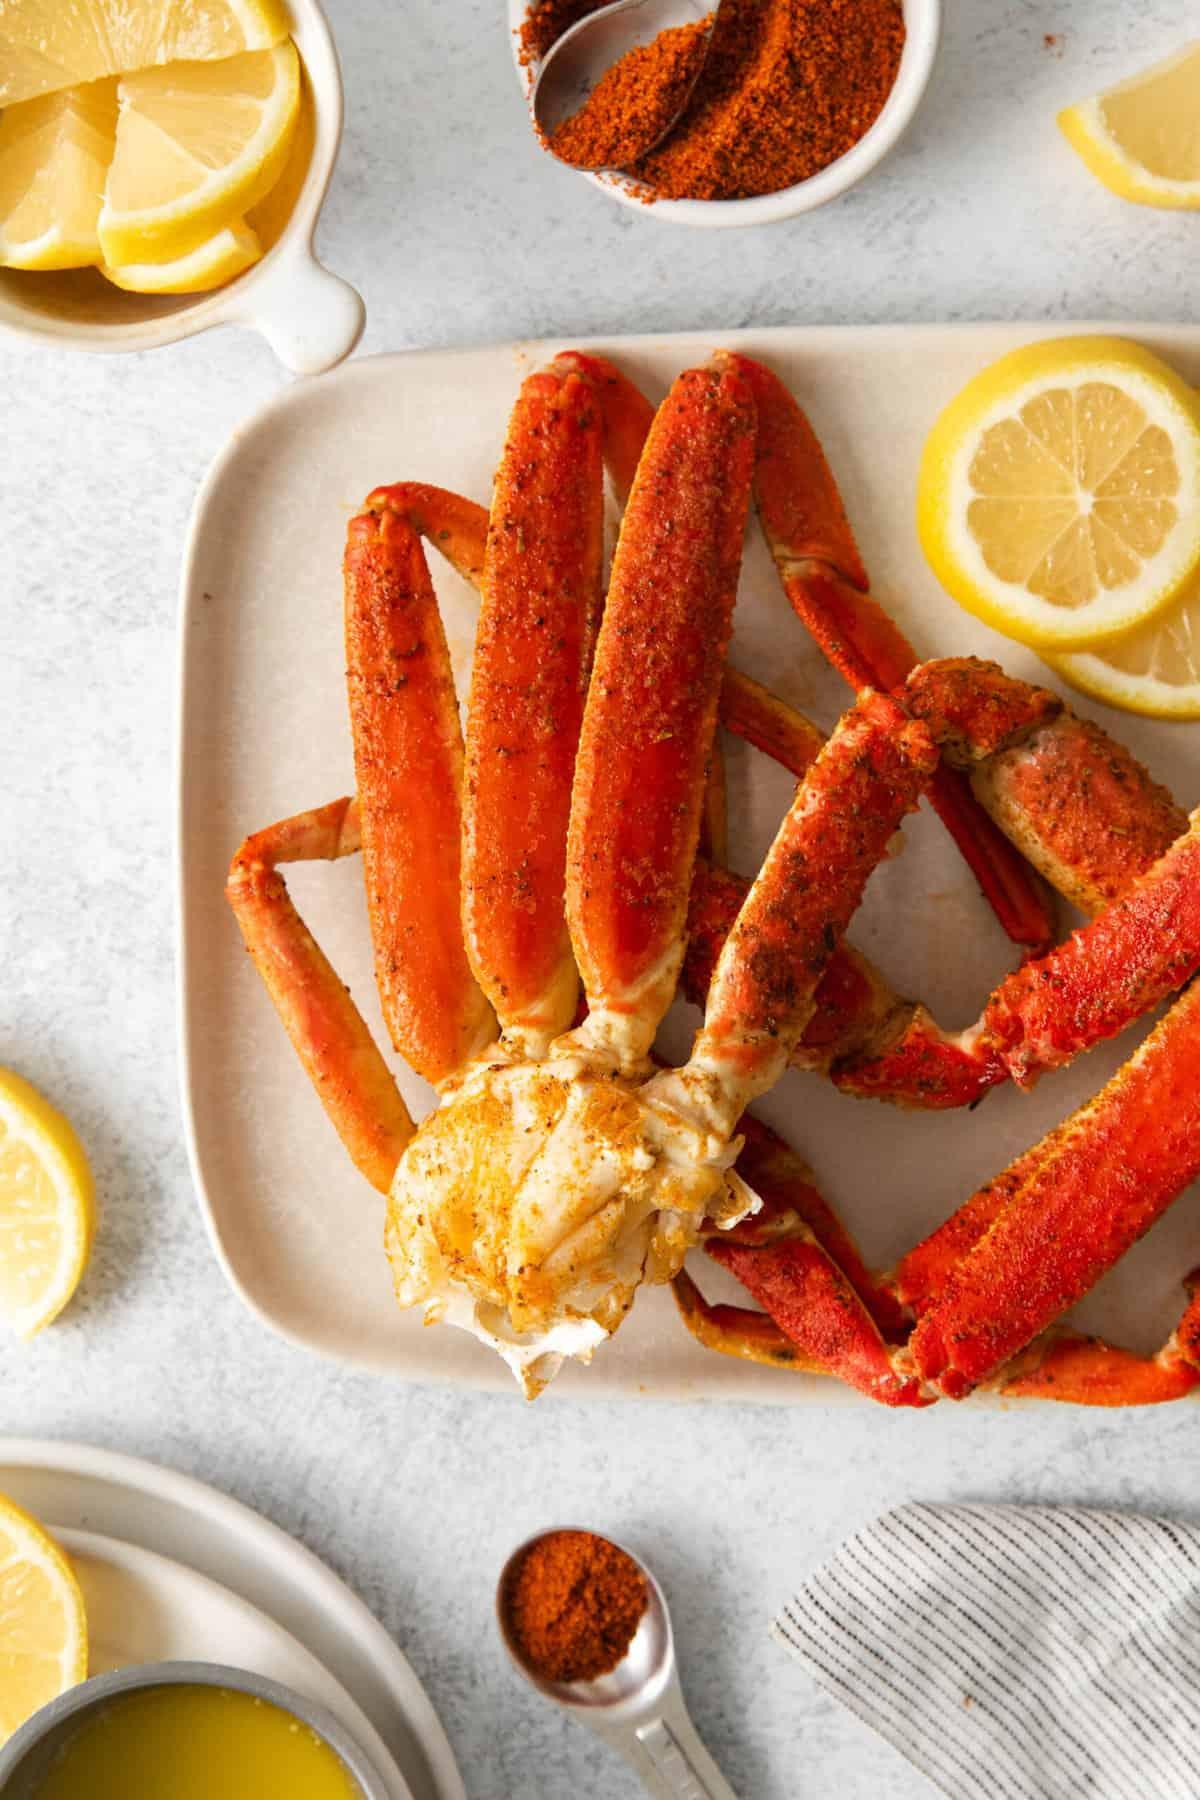 Cooked snow crab legs on a white plate with lemon.